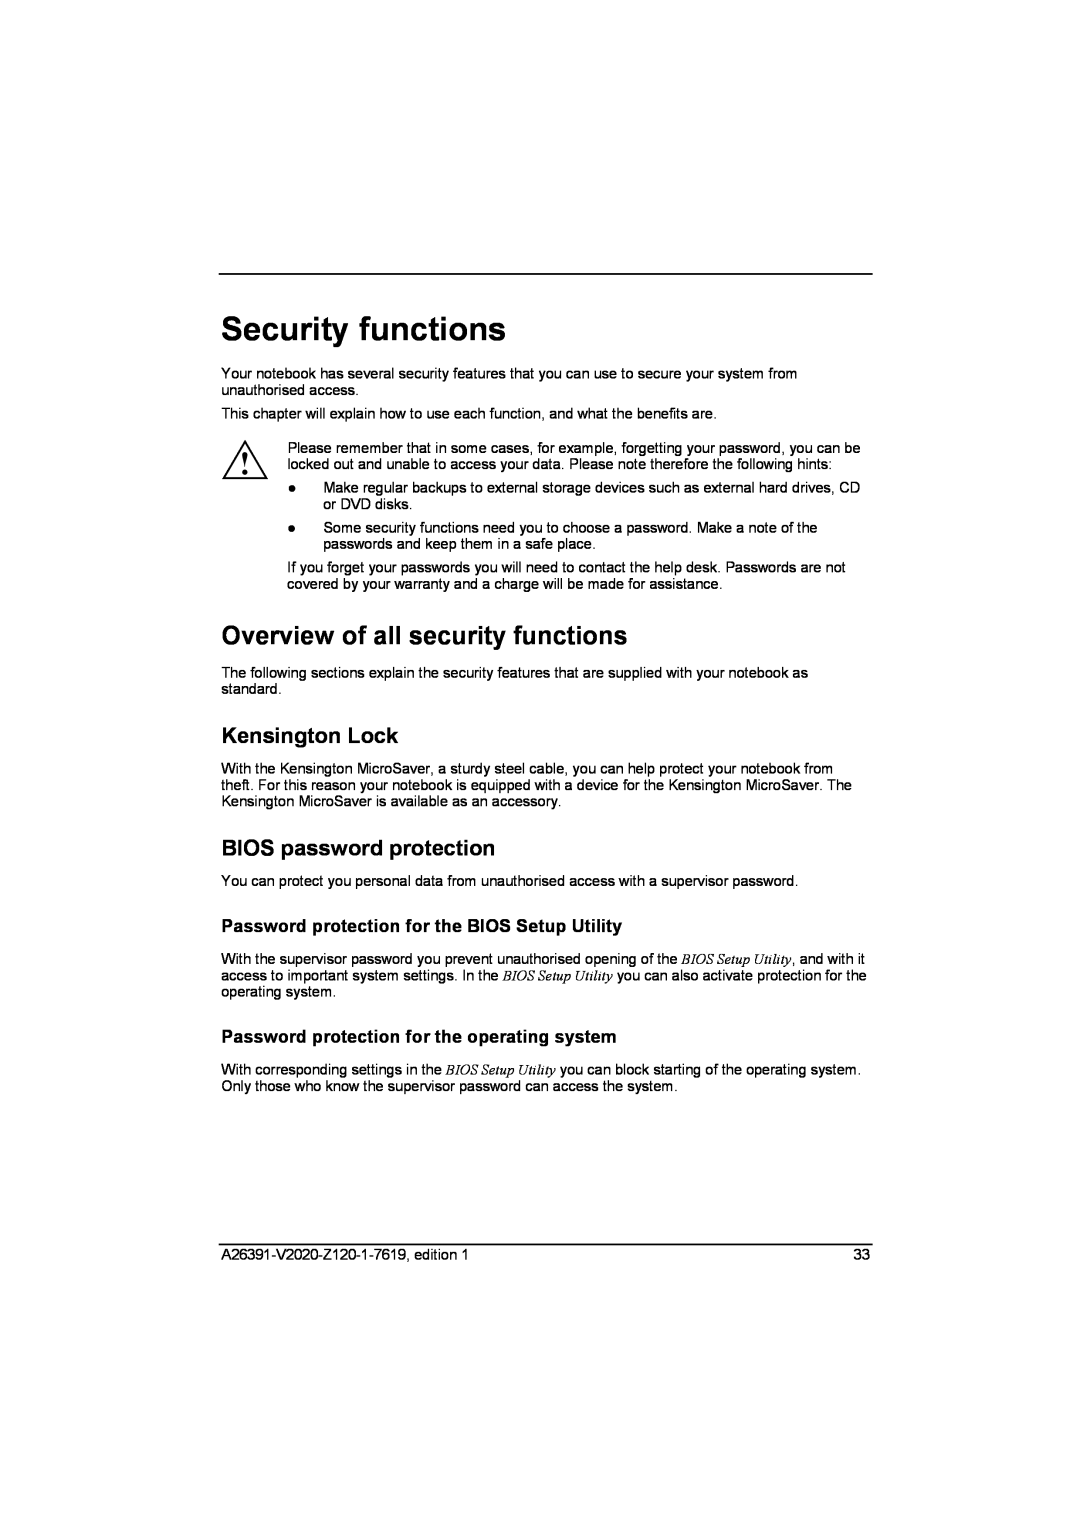 Fujitsu Siemens Computers V2020 manual Security functions, Overview of all security functions, Kensington Lock 